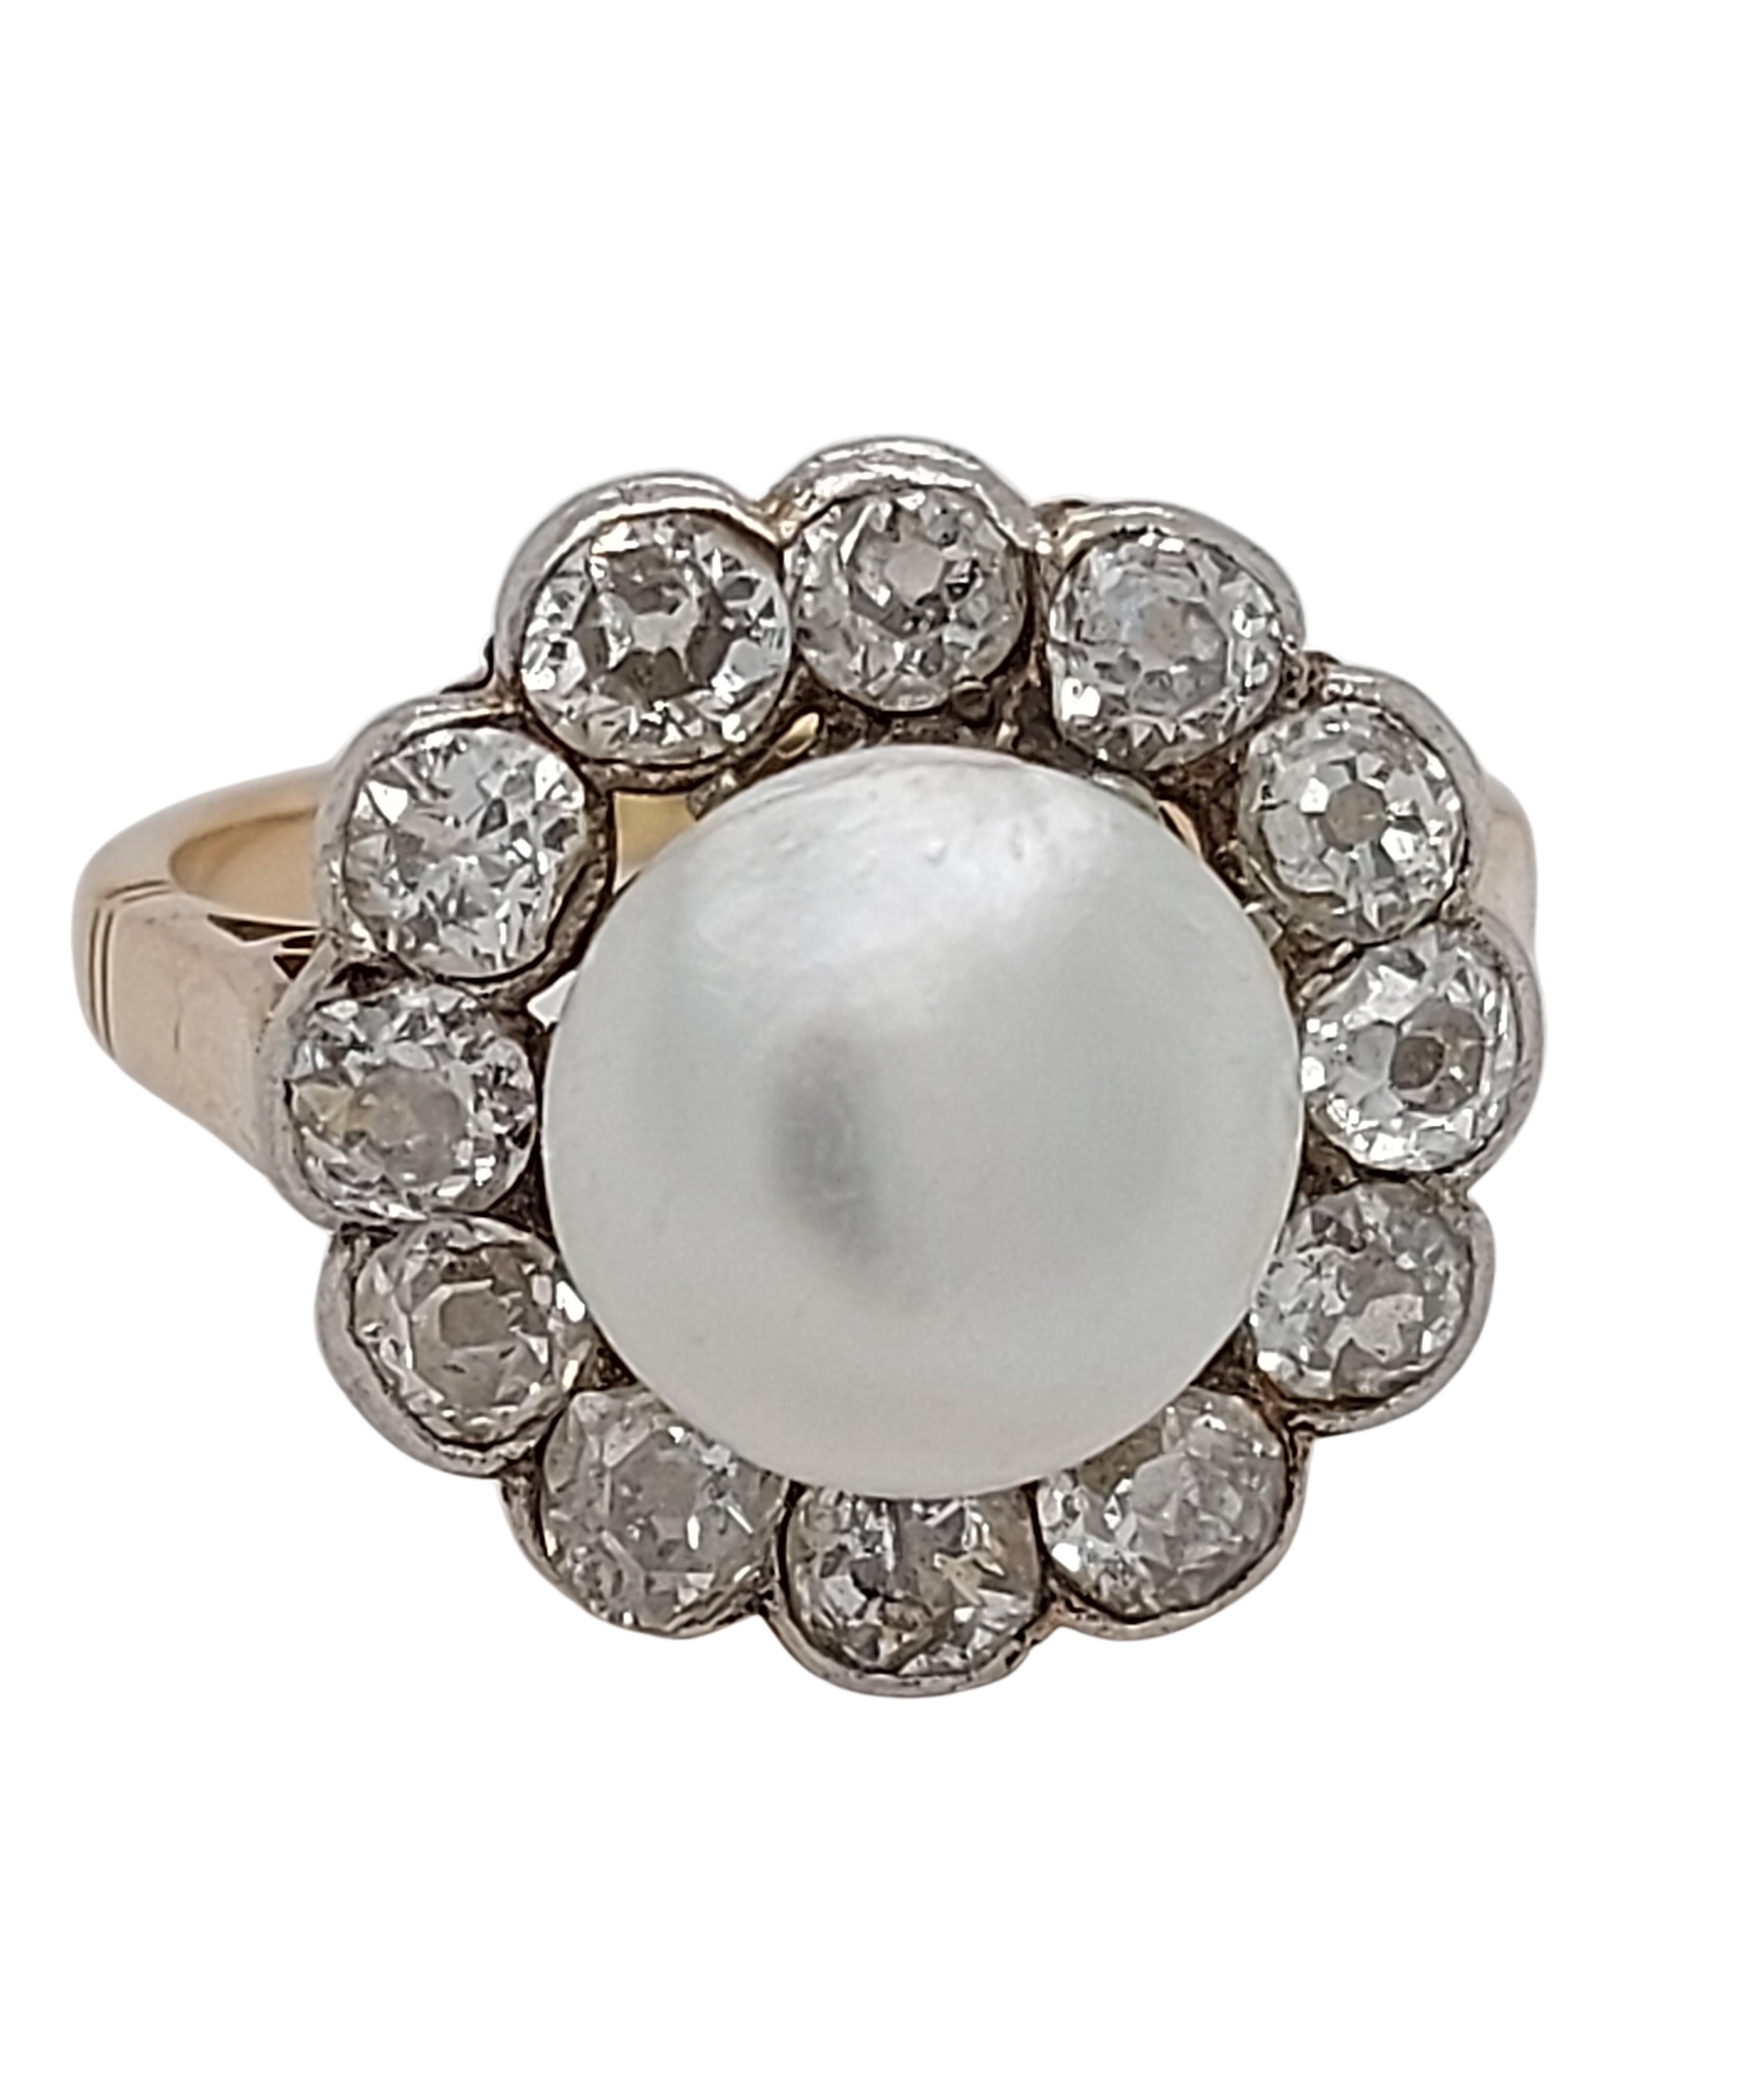 Stunning 18kt Yellow Gold set with 4.35 Ct. Cultured Pearl & Old Mine Diamonds Ring With ALGT Certificate

Pearl: Cultured Pearl, Salt Water, South Sea, Pinctada Maxima 

Details: Round Button, 9.47 x 6.50 mm, 4.35 Carat, Silver white colour, No